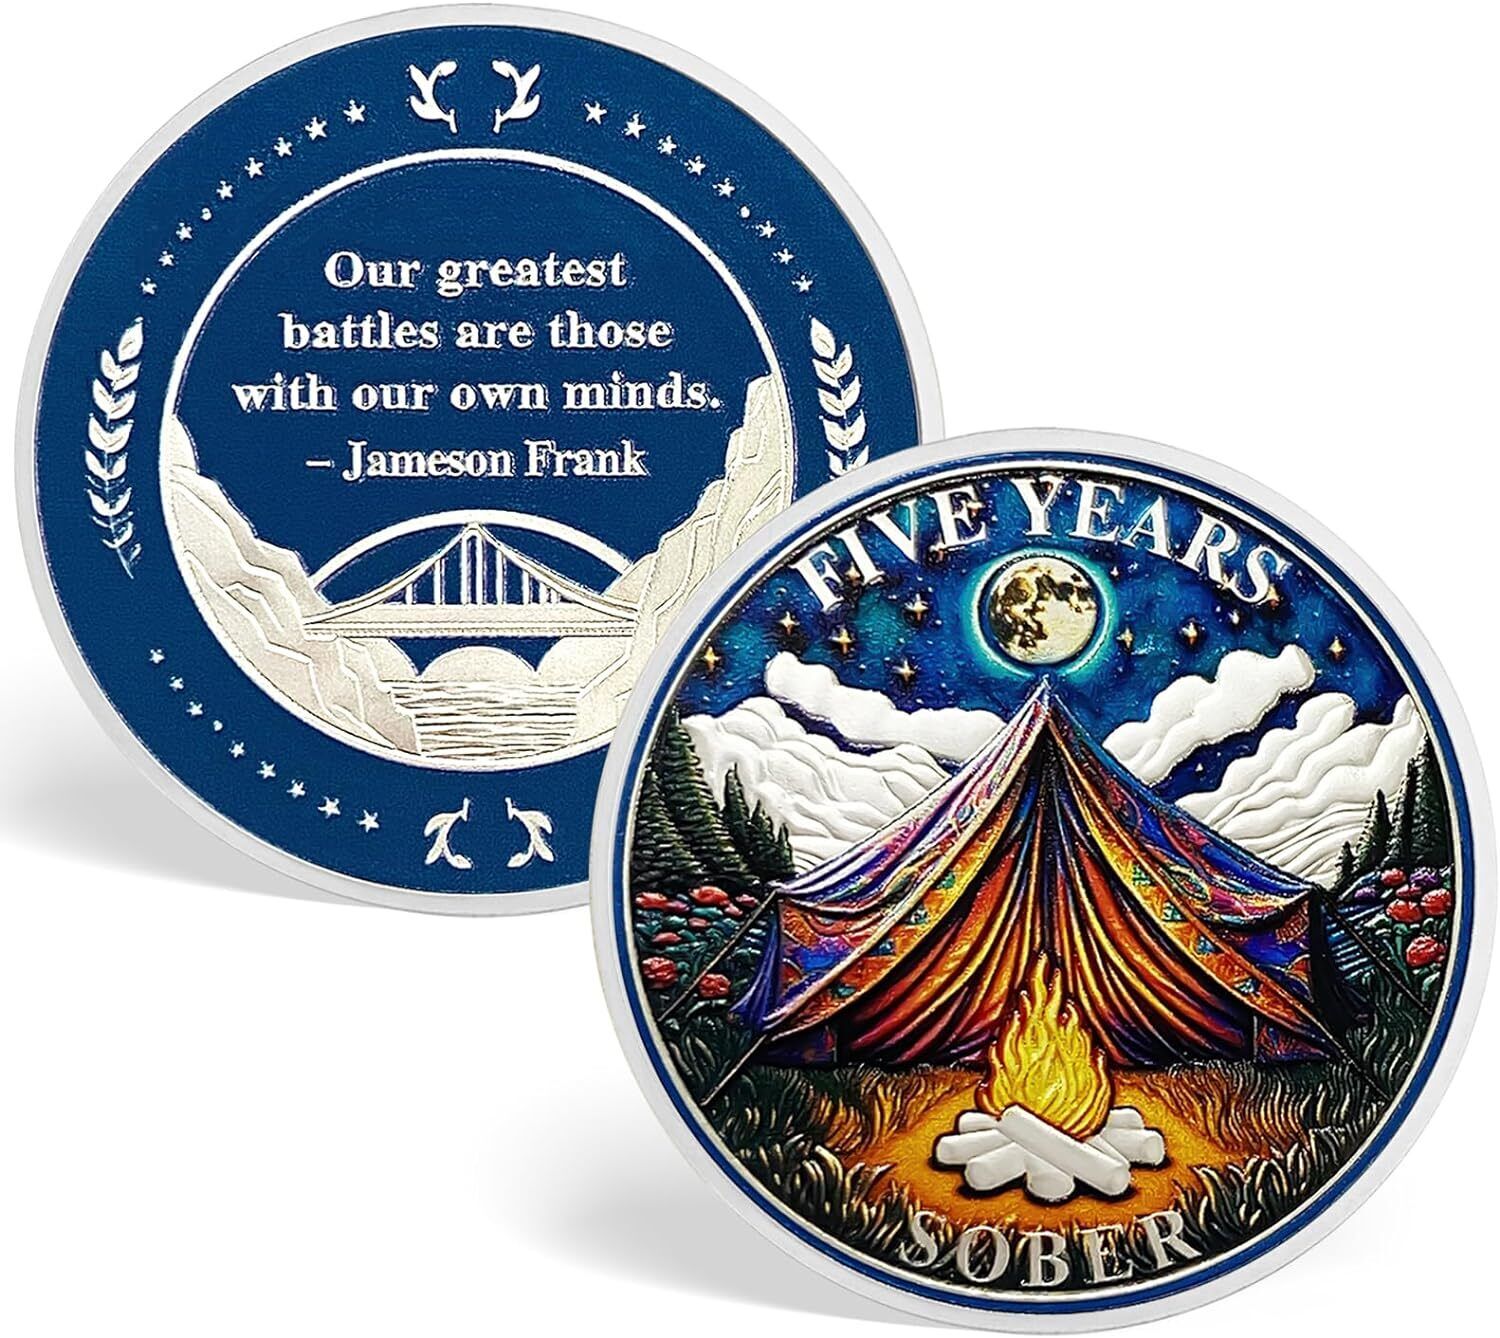 5 Year Sobriety Coin One Year Sobriety Chip AA Medallions Gifts for Women Men